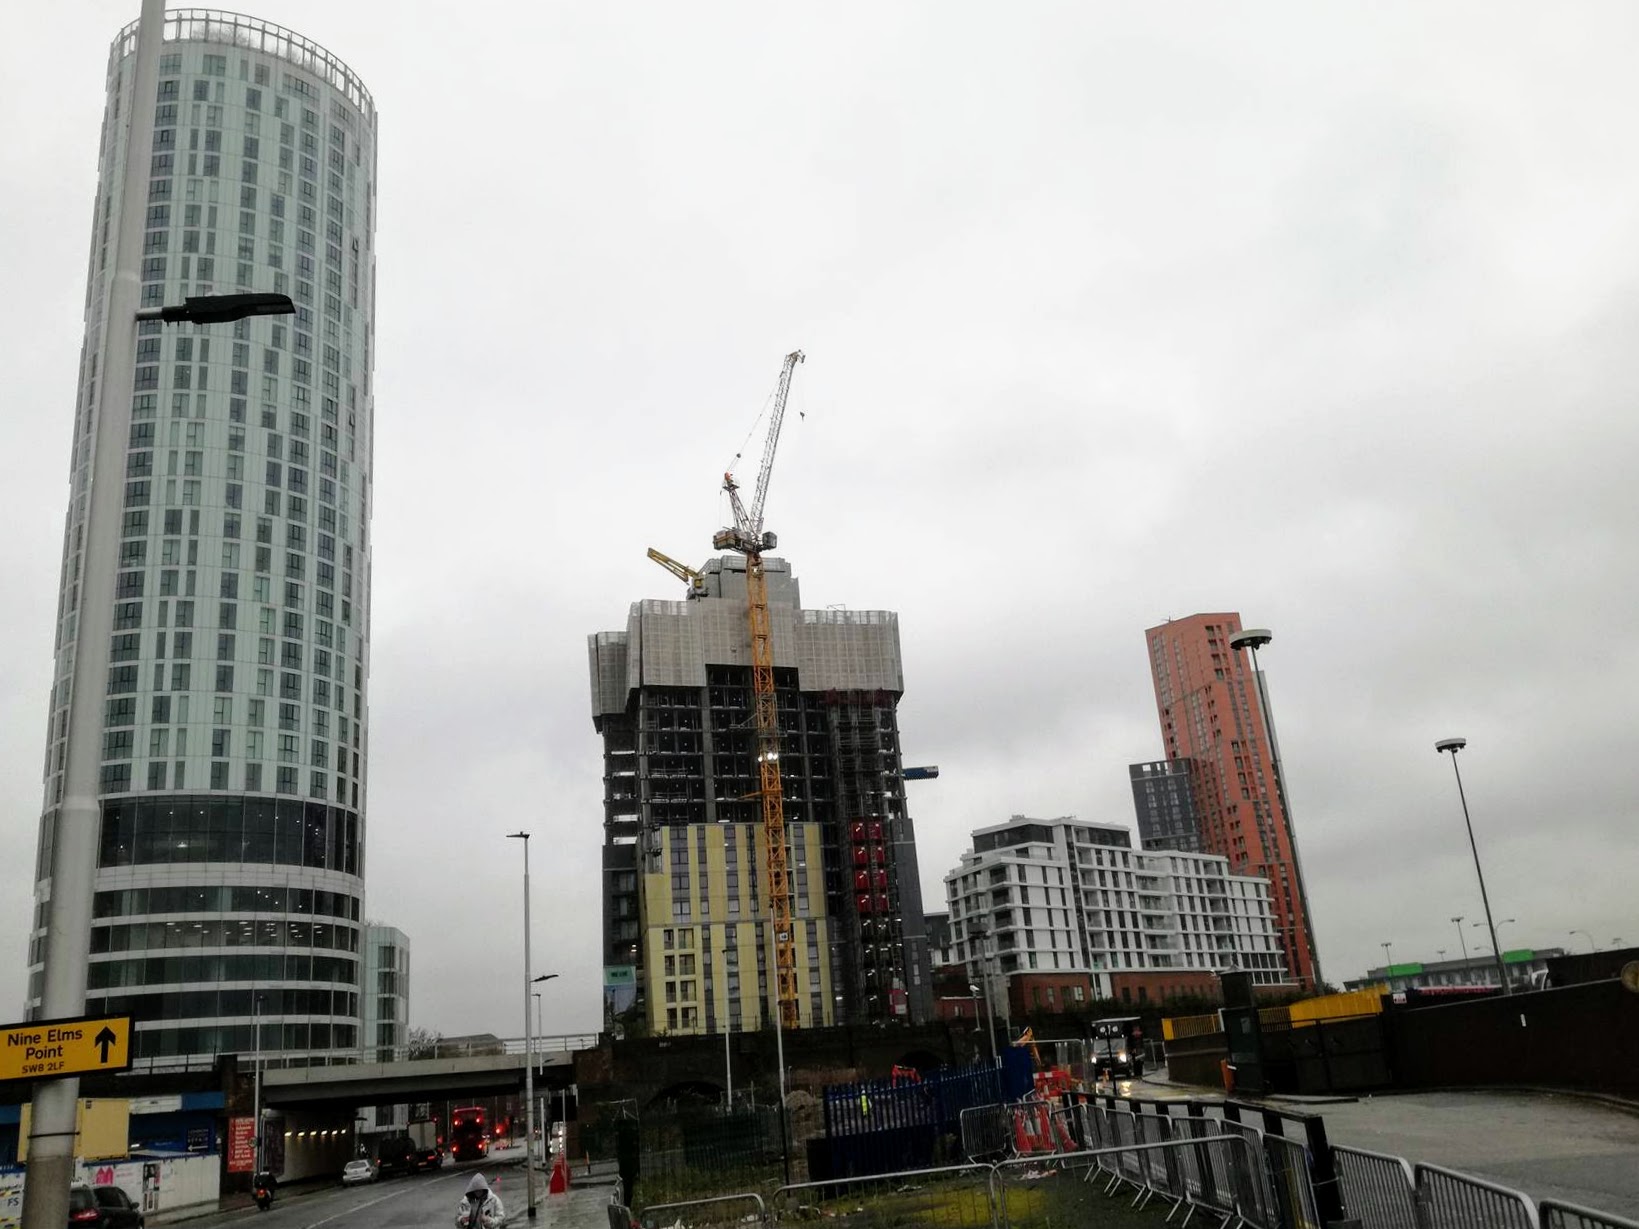 Nine Elms, London is changing its appearance with contribution of Sipral